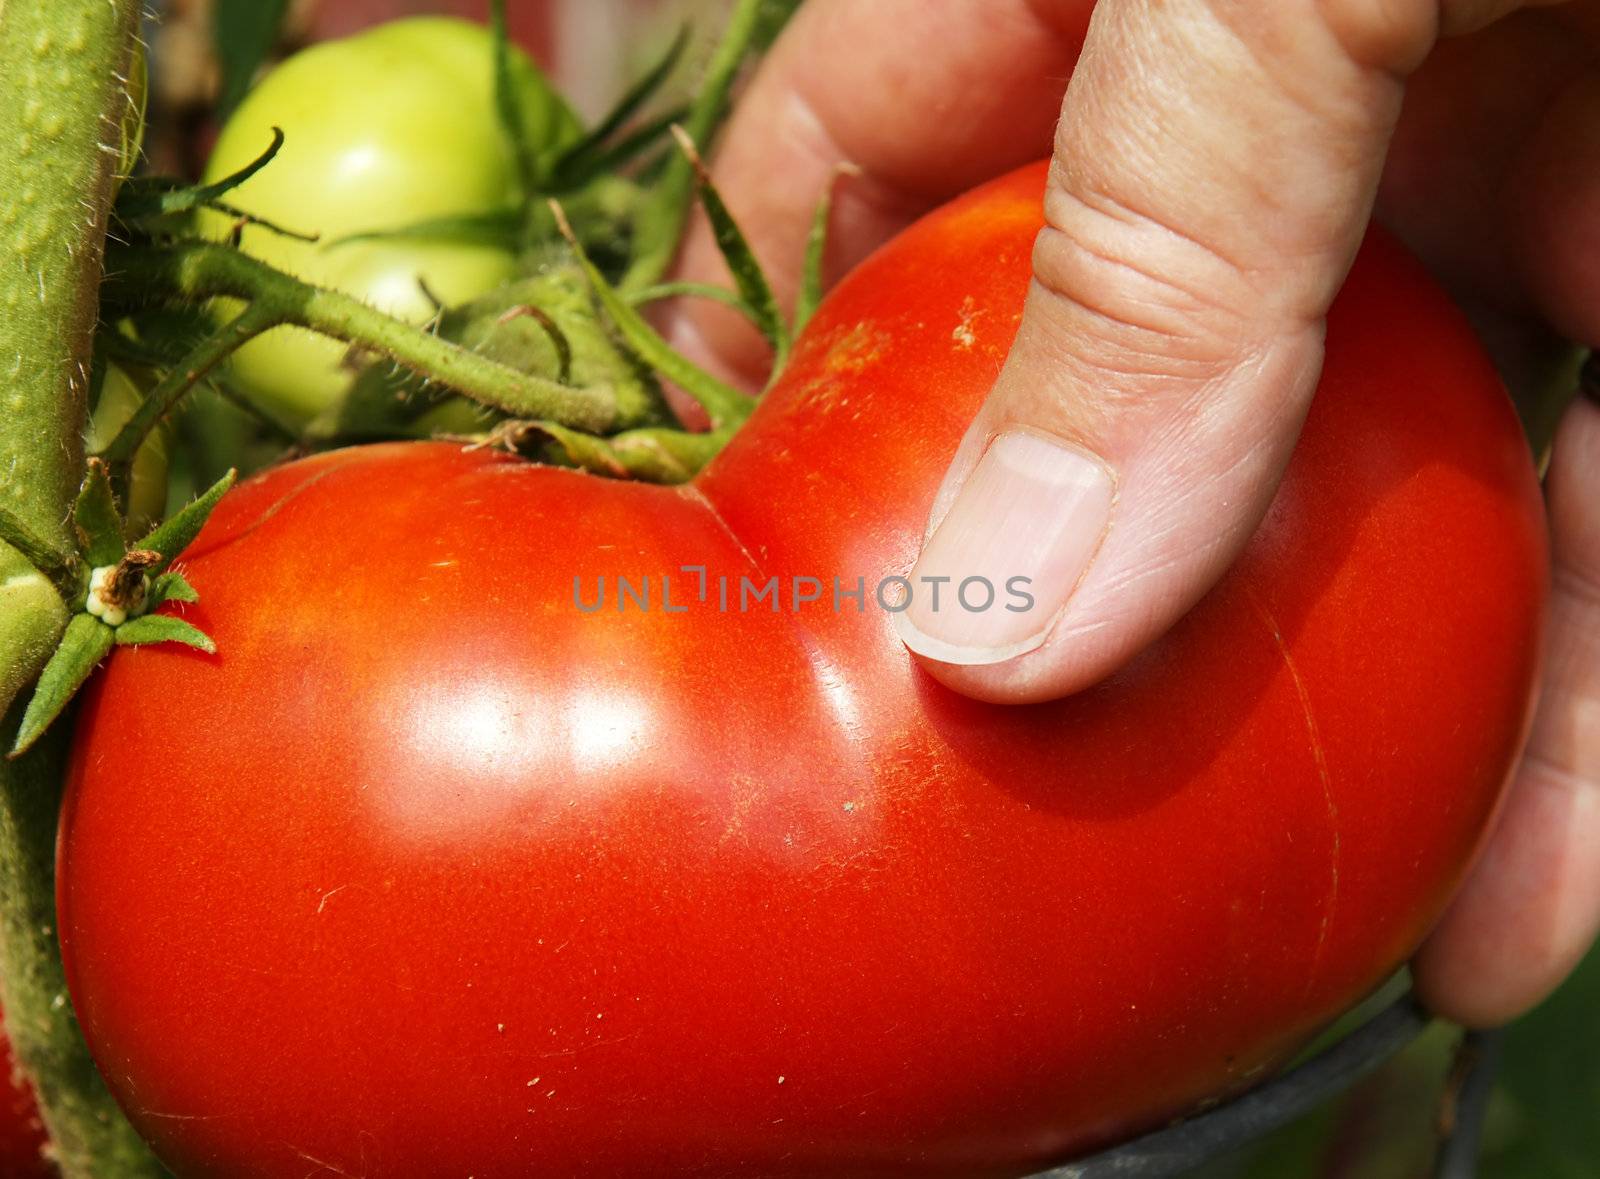 Close up on hand picking up a big red juicy tomato directly on the stem on a bright sunny day. Great details on the tomato skin.